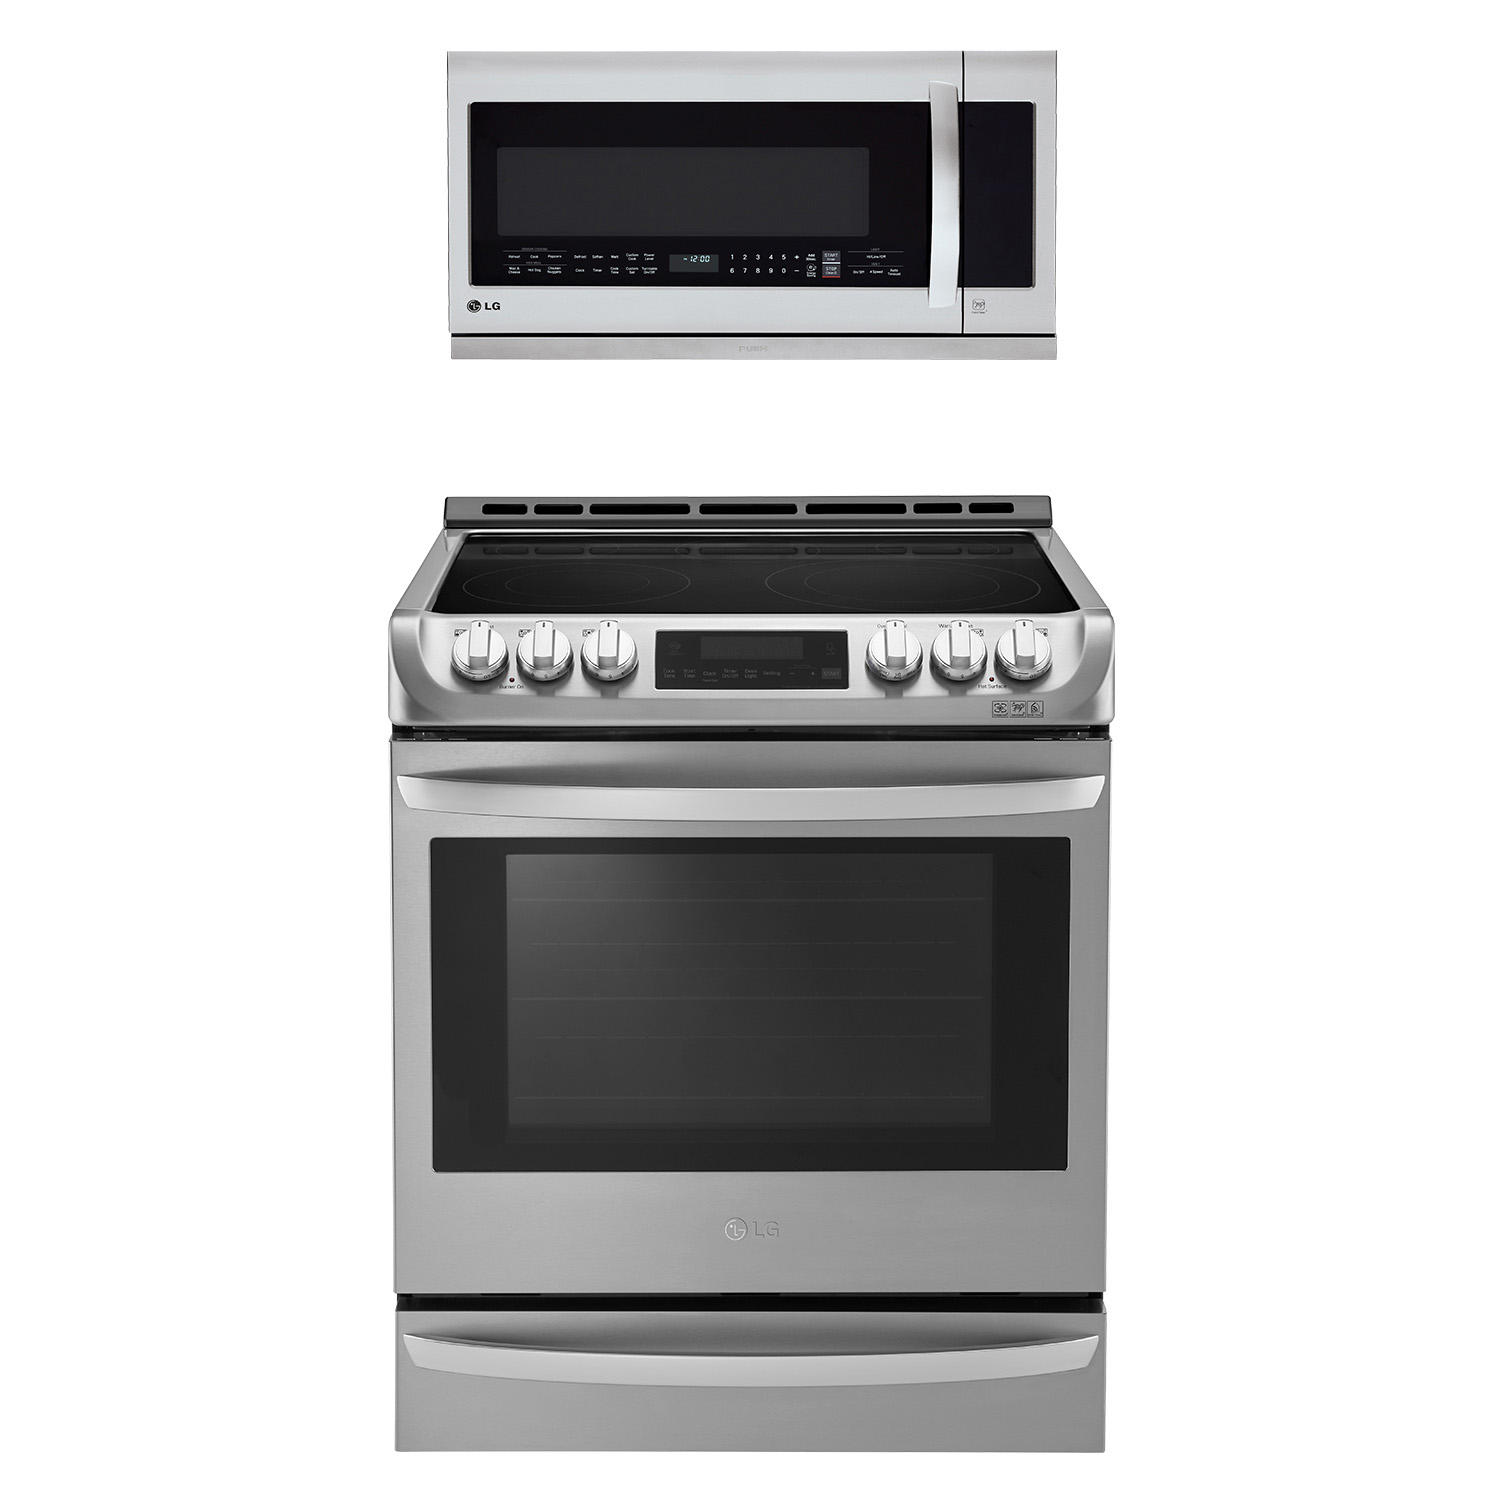 LG 6.3 Cu Ft Single Oven Slide-In Range with ProBake Convection and 2.2 Cu Ft OTR Microwave Suite